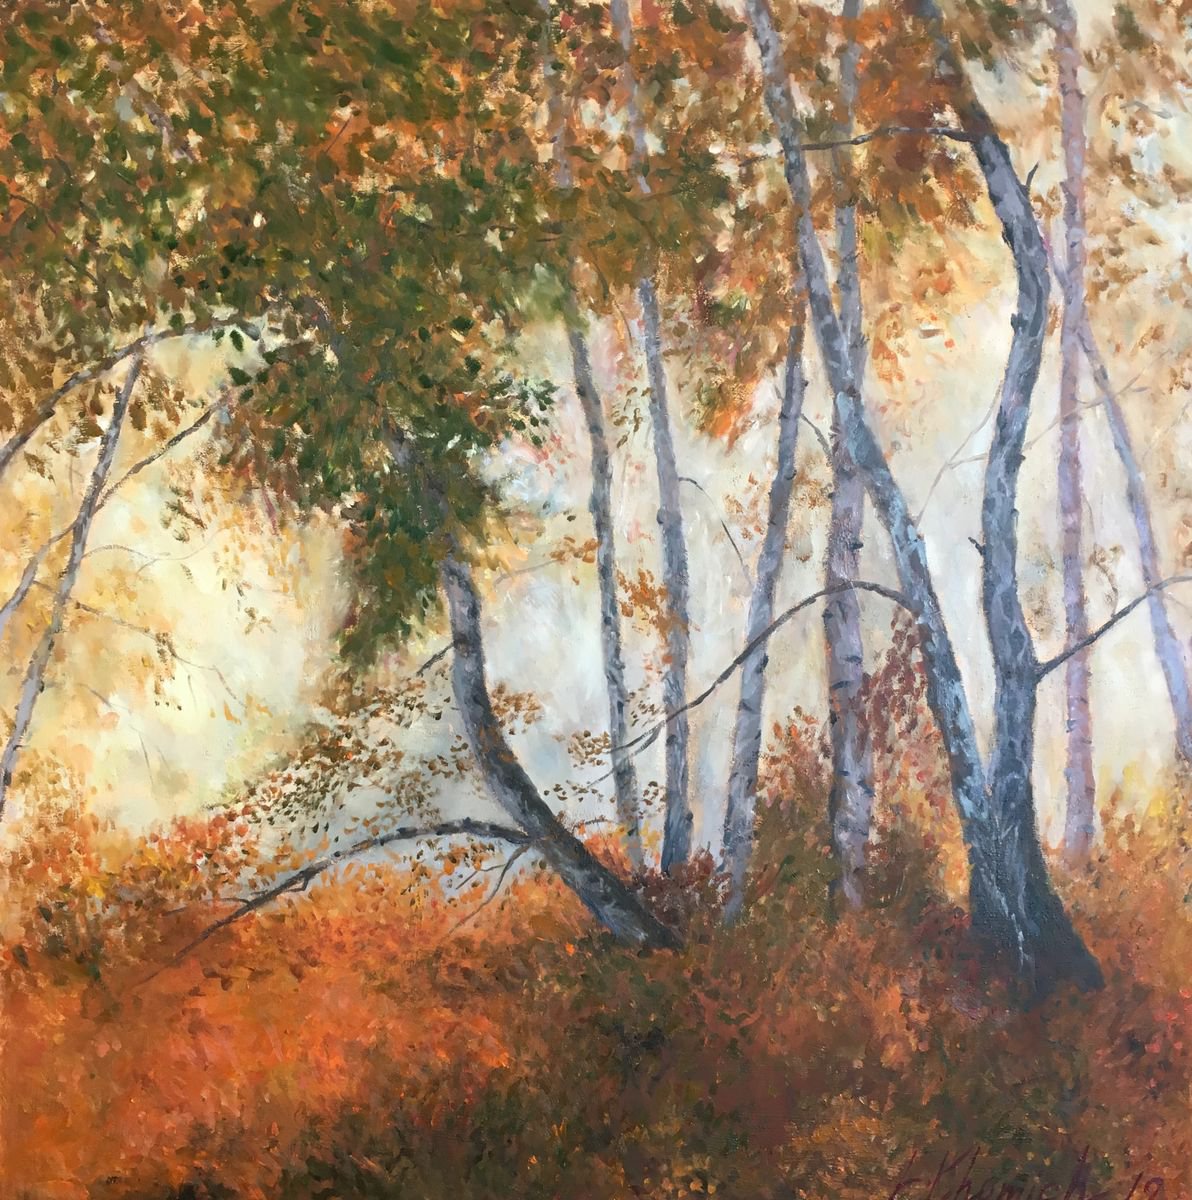 Autumn morning in the forest, landscape painting by Leo Khomich